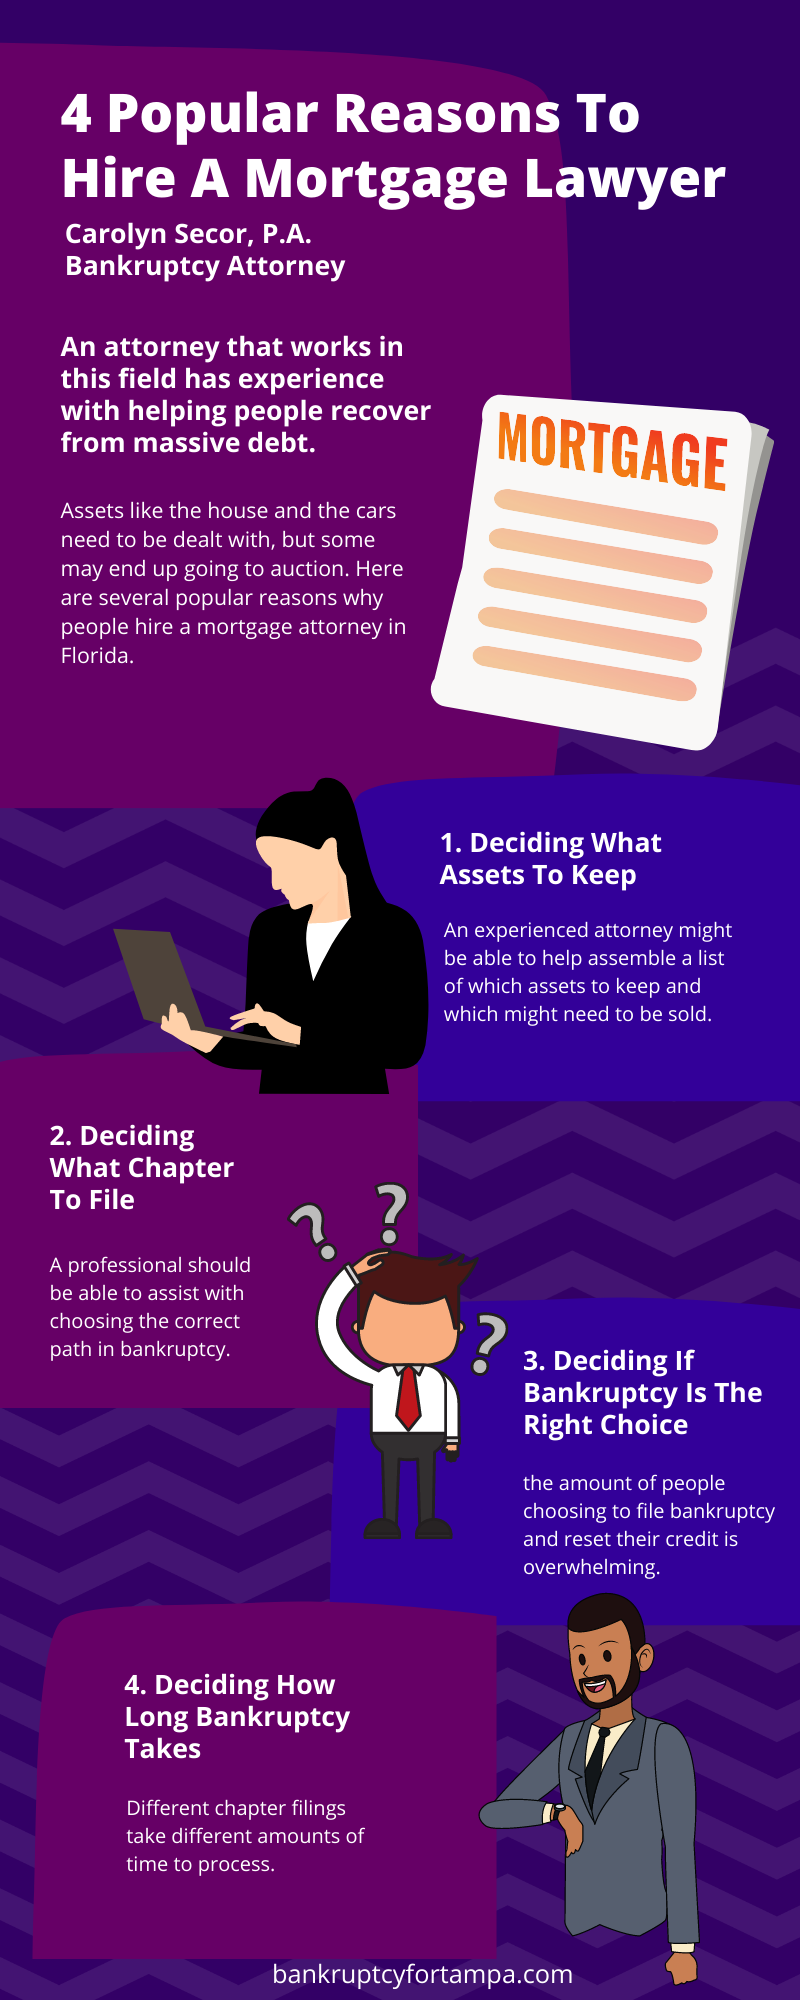 4 Popular Reasons To Hire A Mortgage Lawyer Infographic